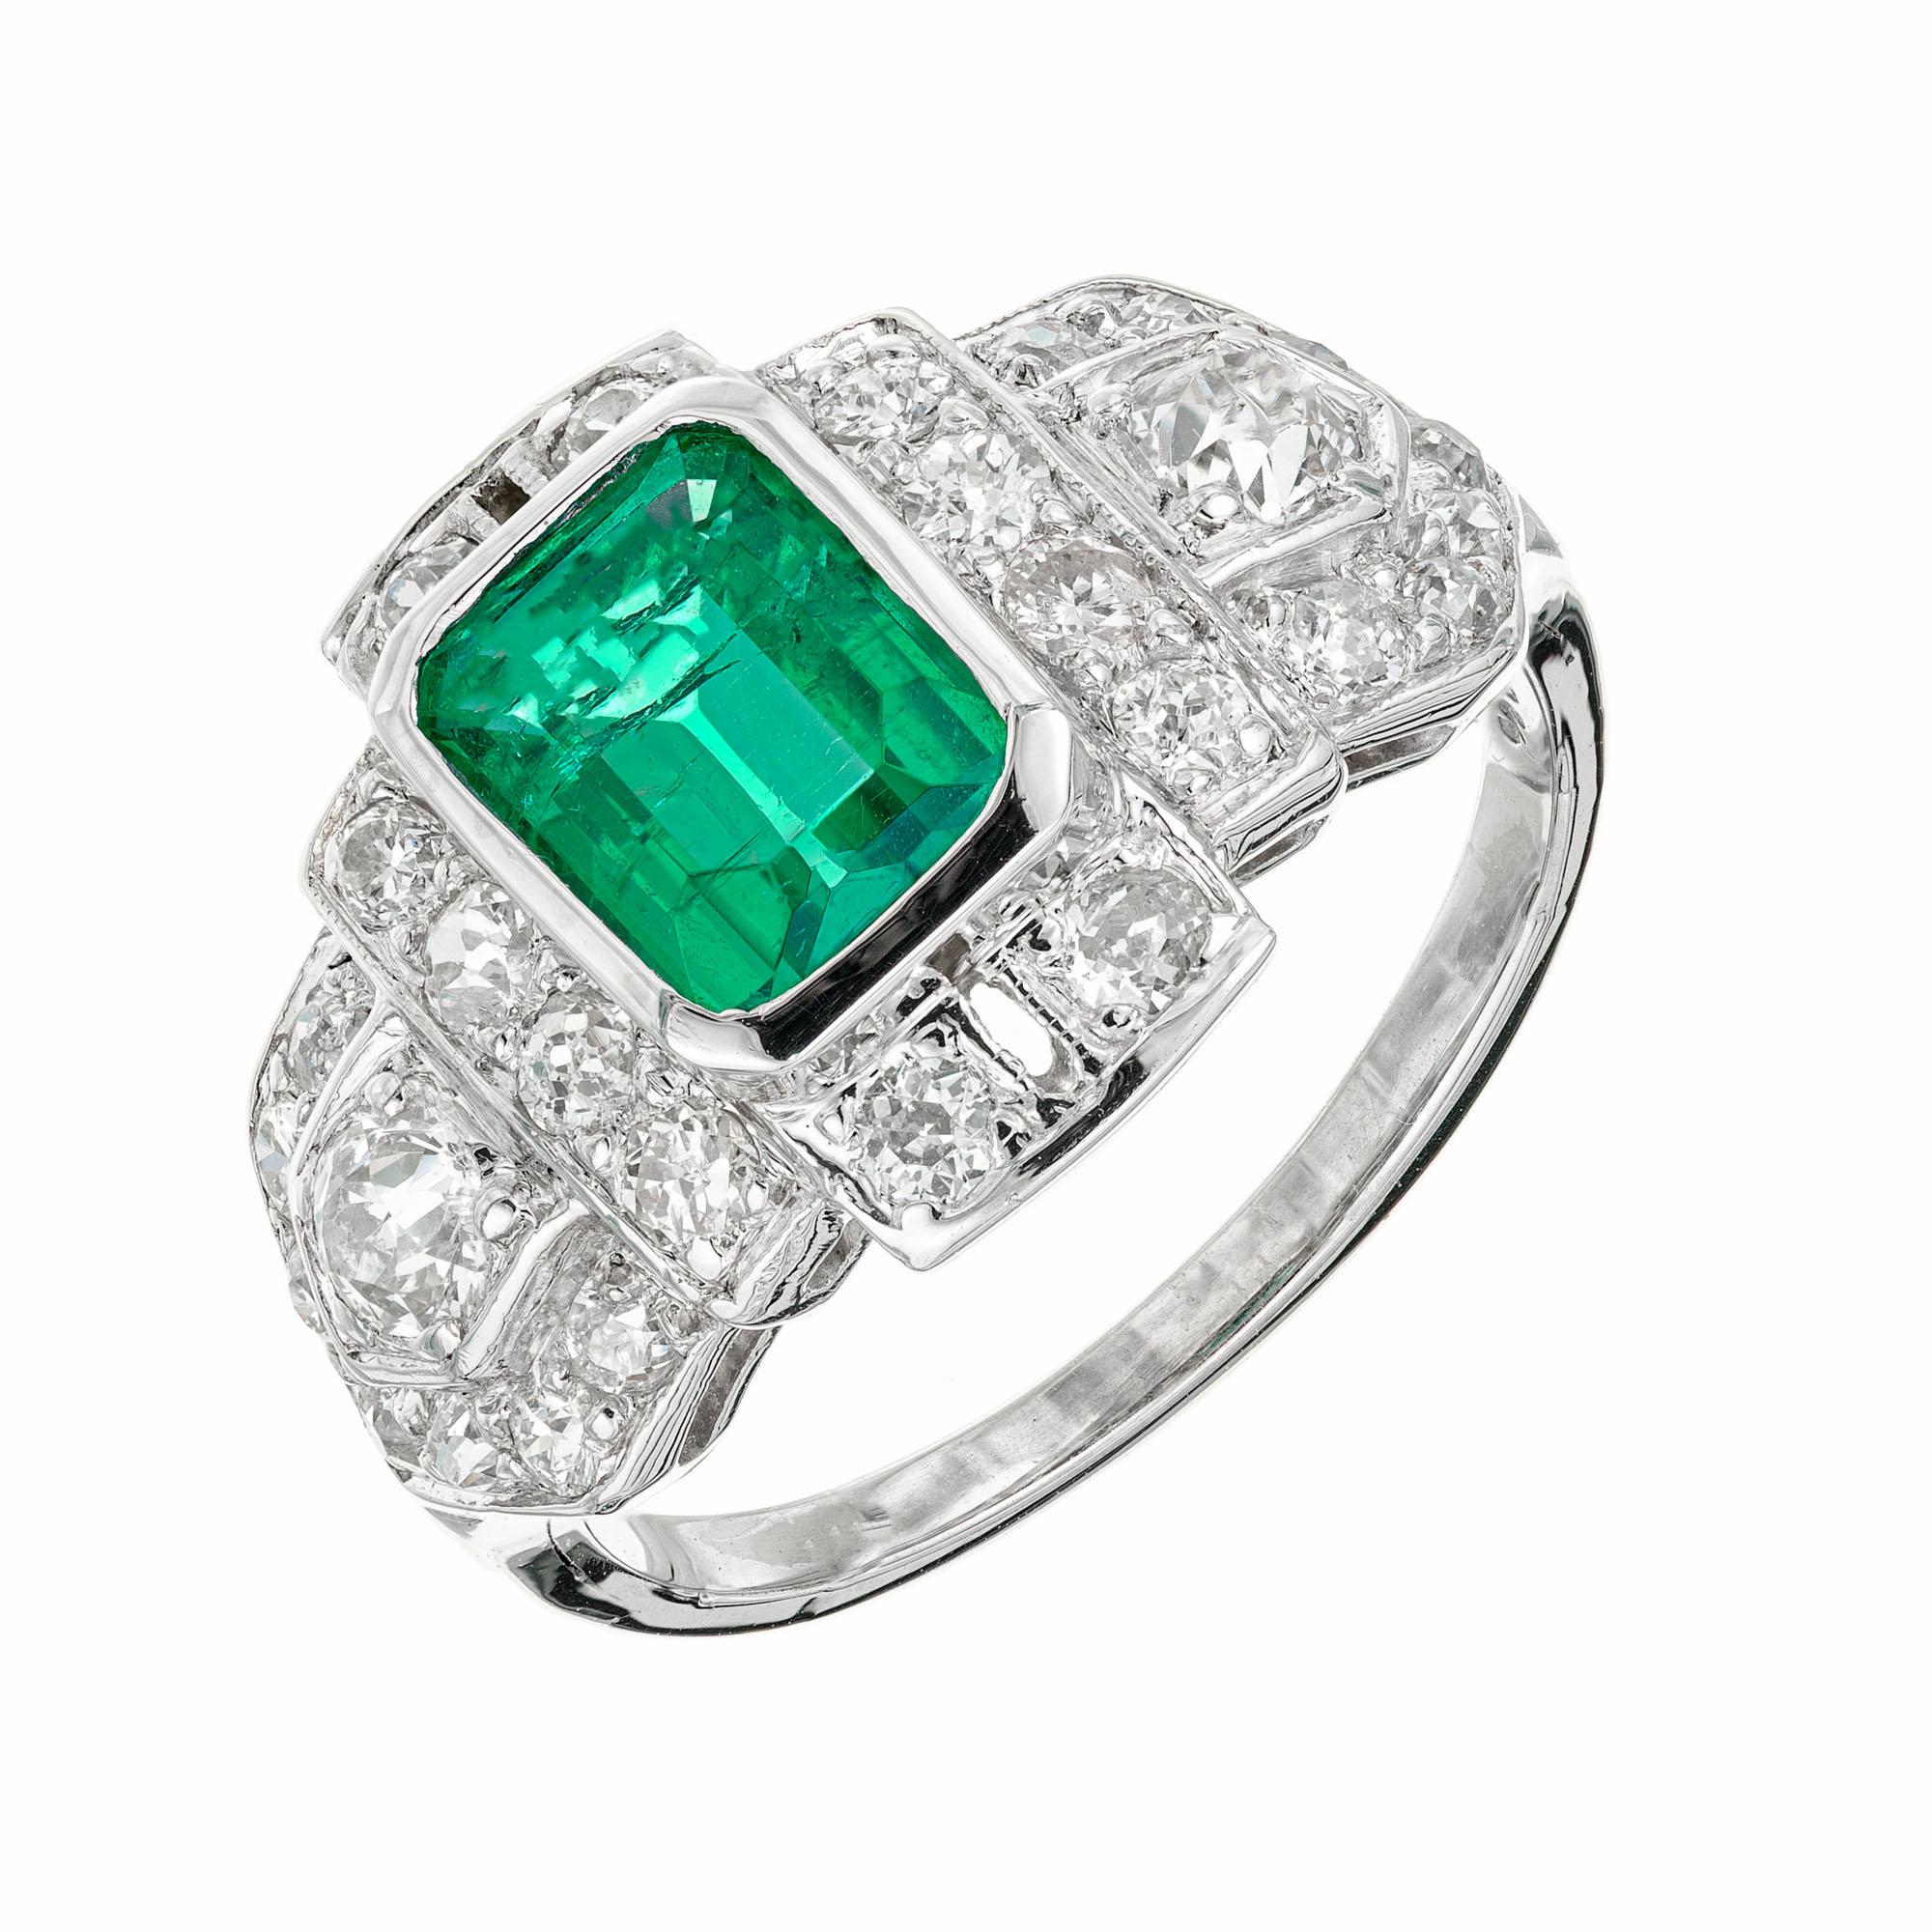 1930's Art Deco hand crafted emerald and diamond platinum ring. GIA certified natural, untreated bezel set octagonal emerald in a platinum setting accented with 28 old European cut diamonds. Emerald has not indications of clarity enhancement. 

1